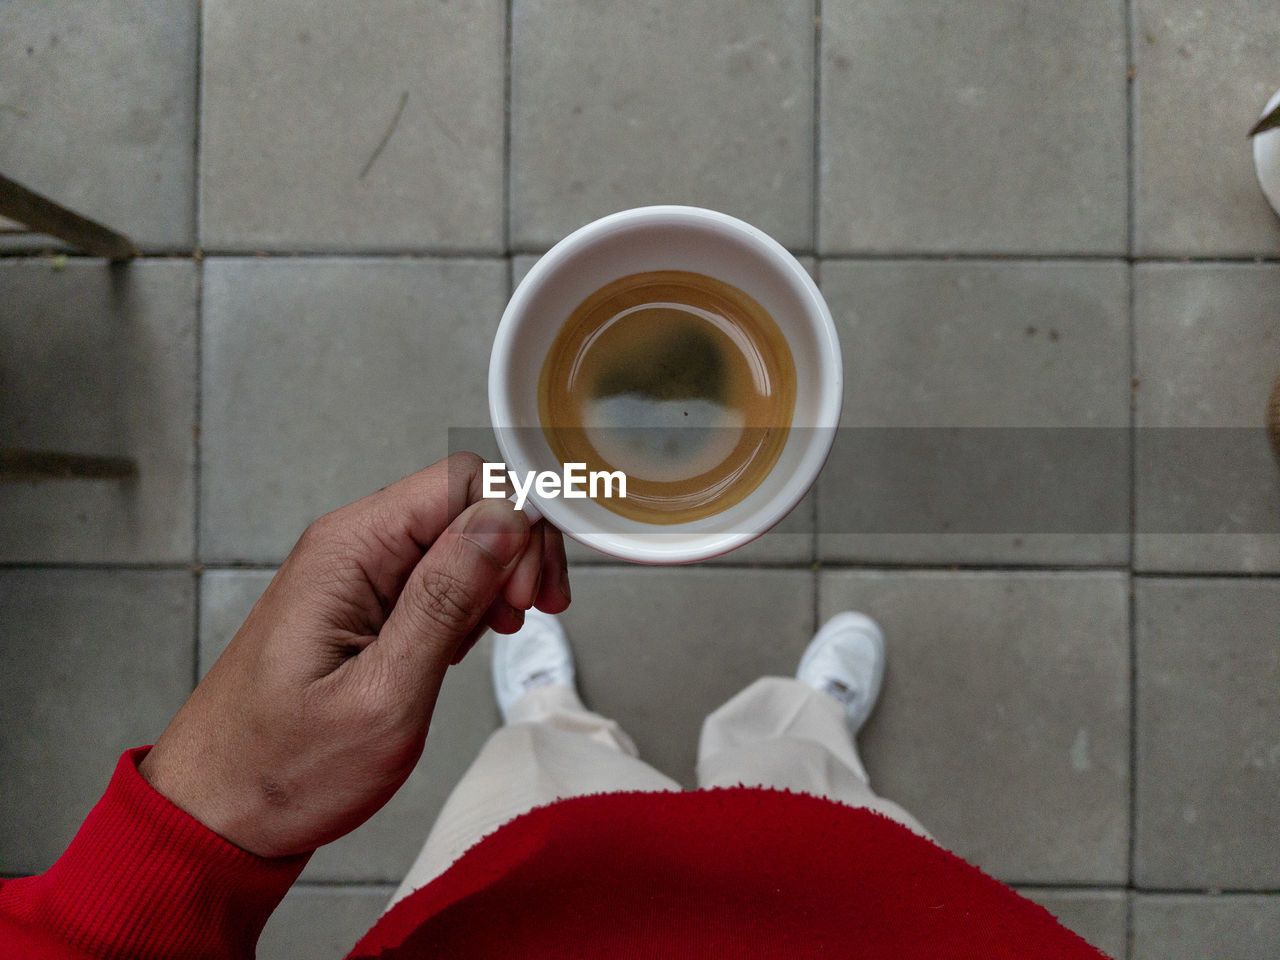 Midsection of person holding coffee cup on floor